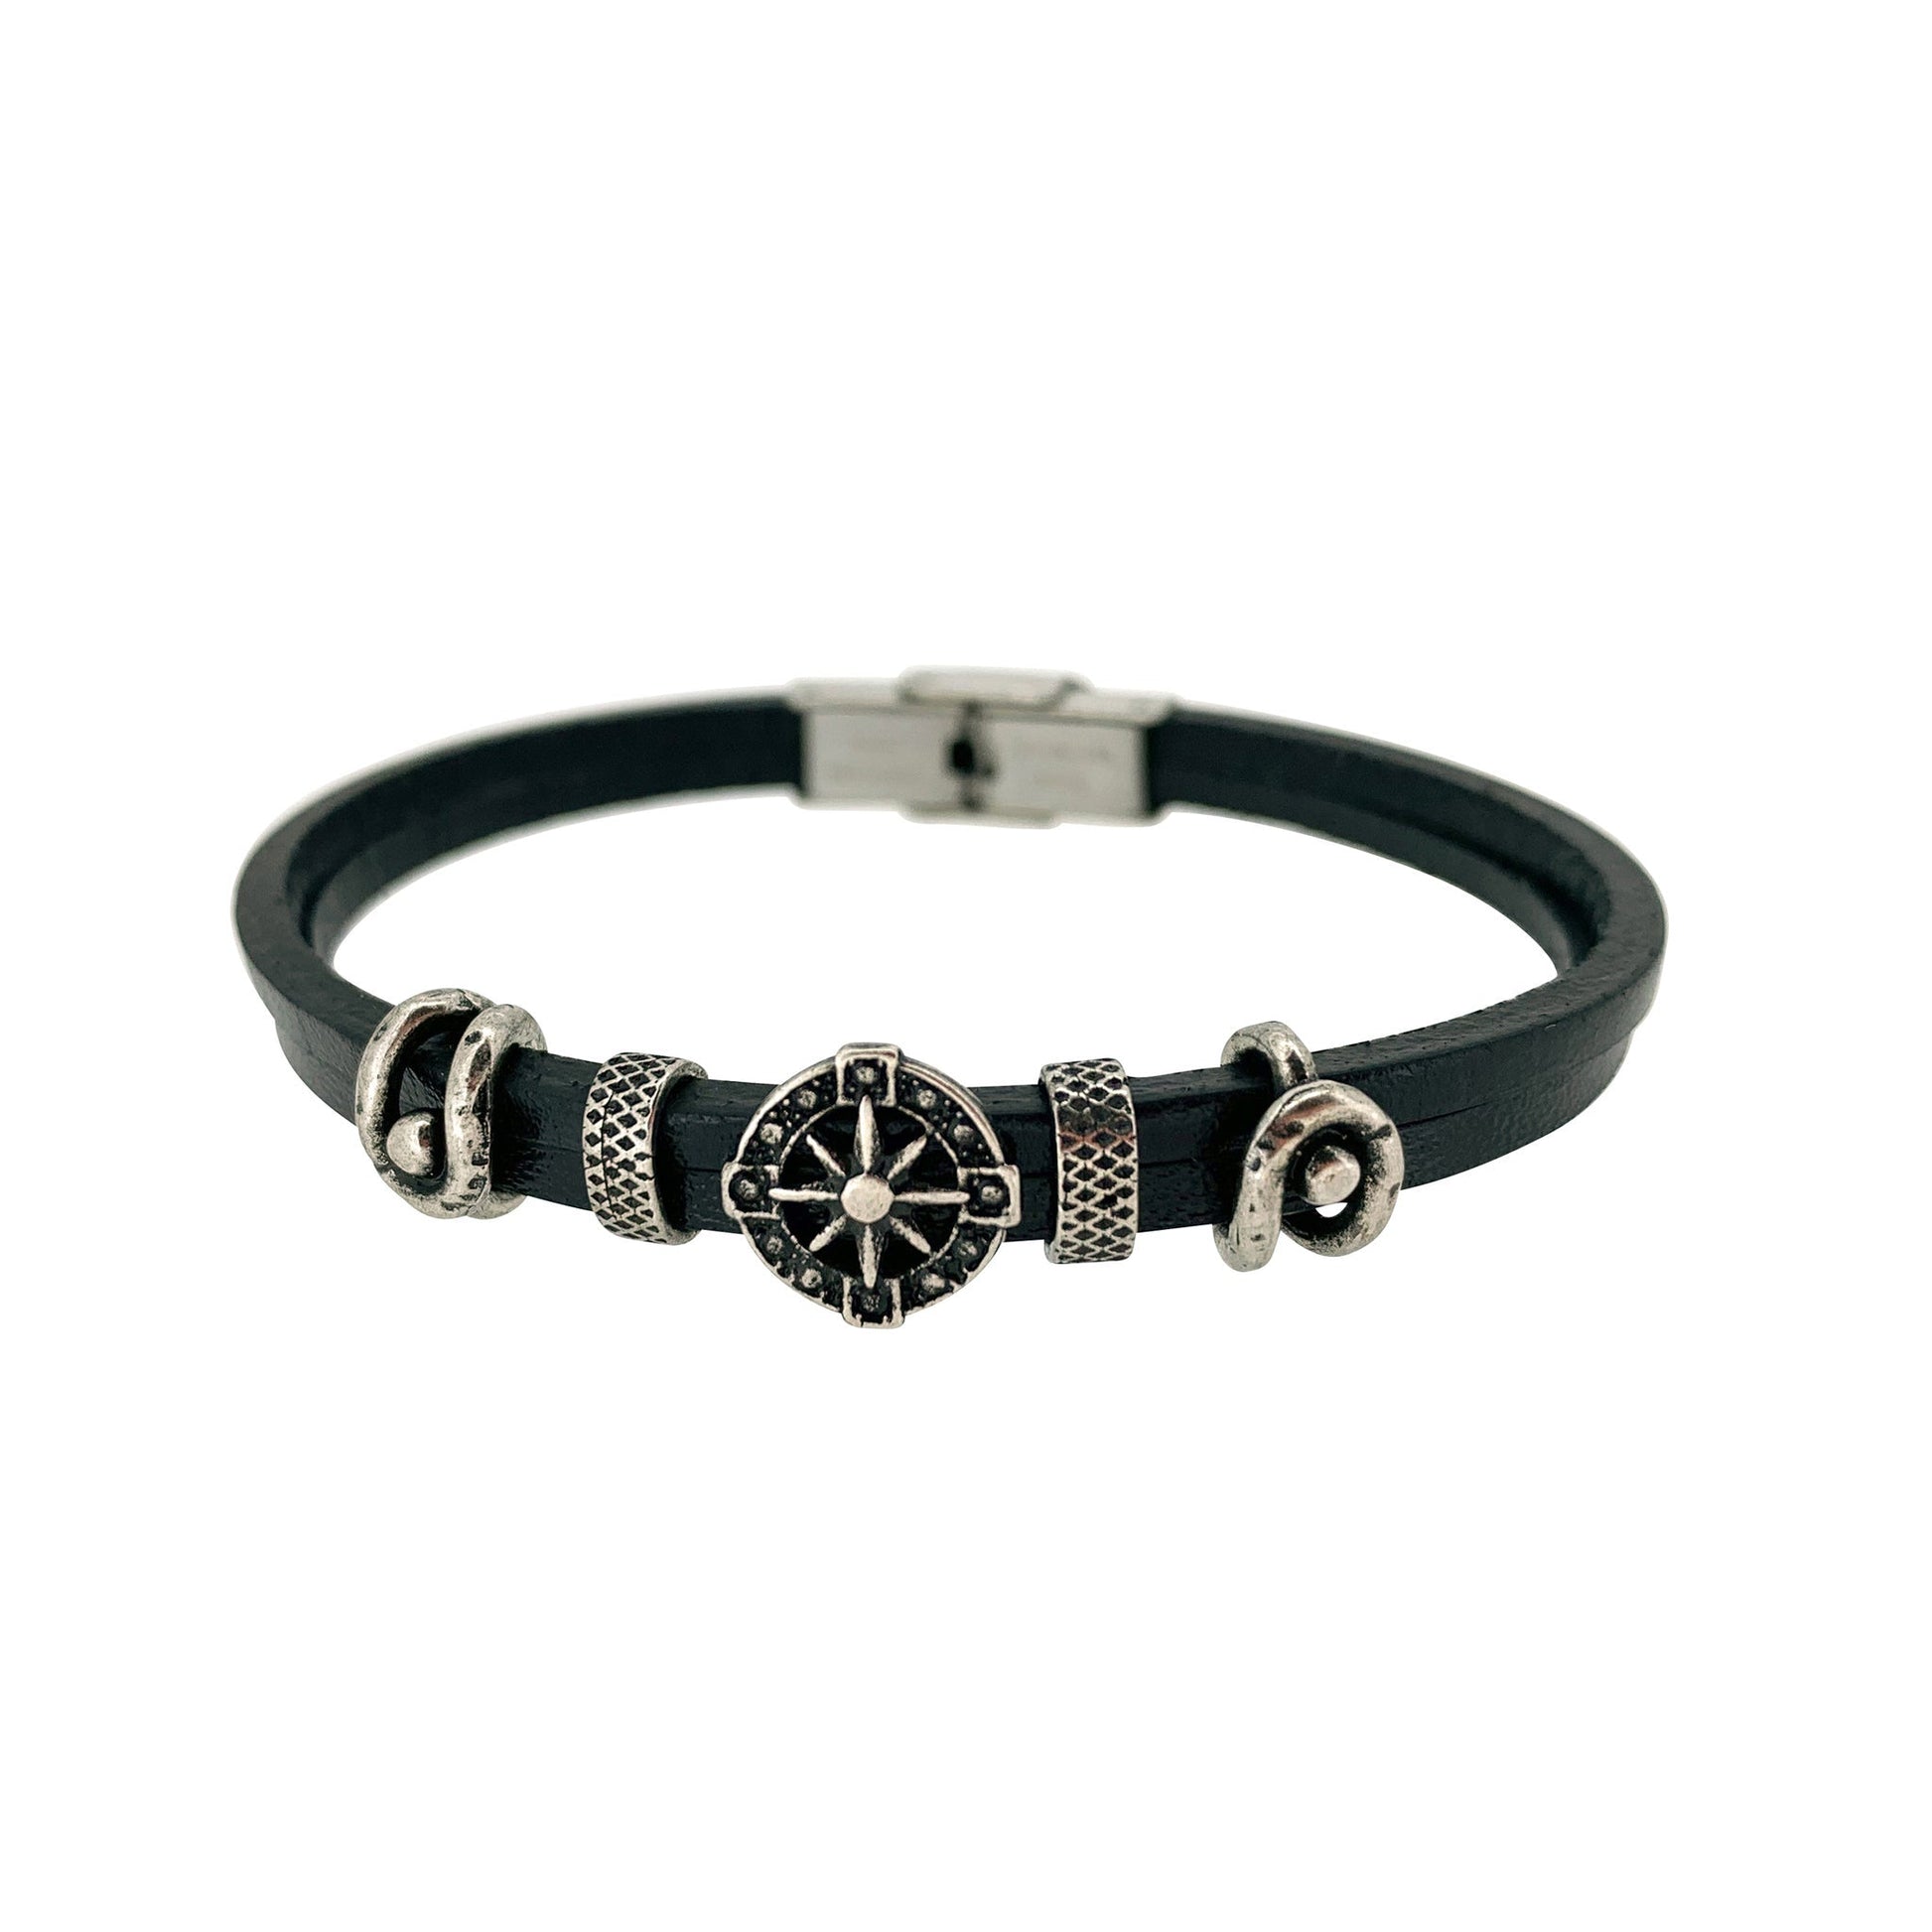 A leather cord bracelet with stainless steel nautical design displayed on a neutral white background.